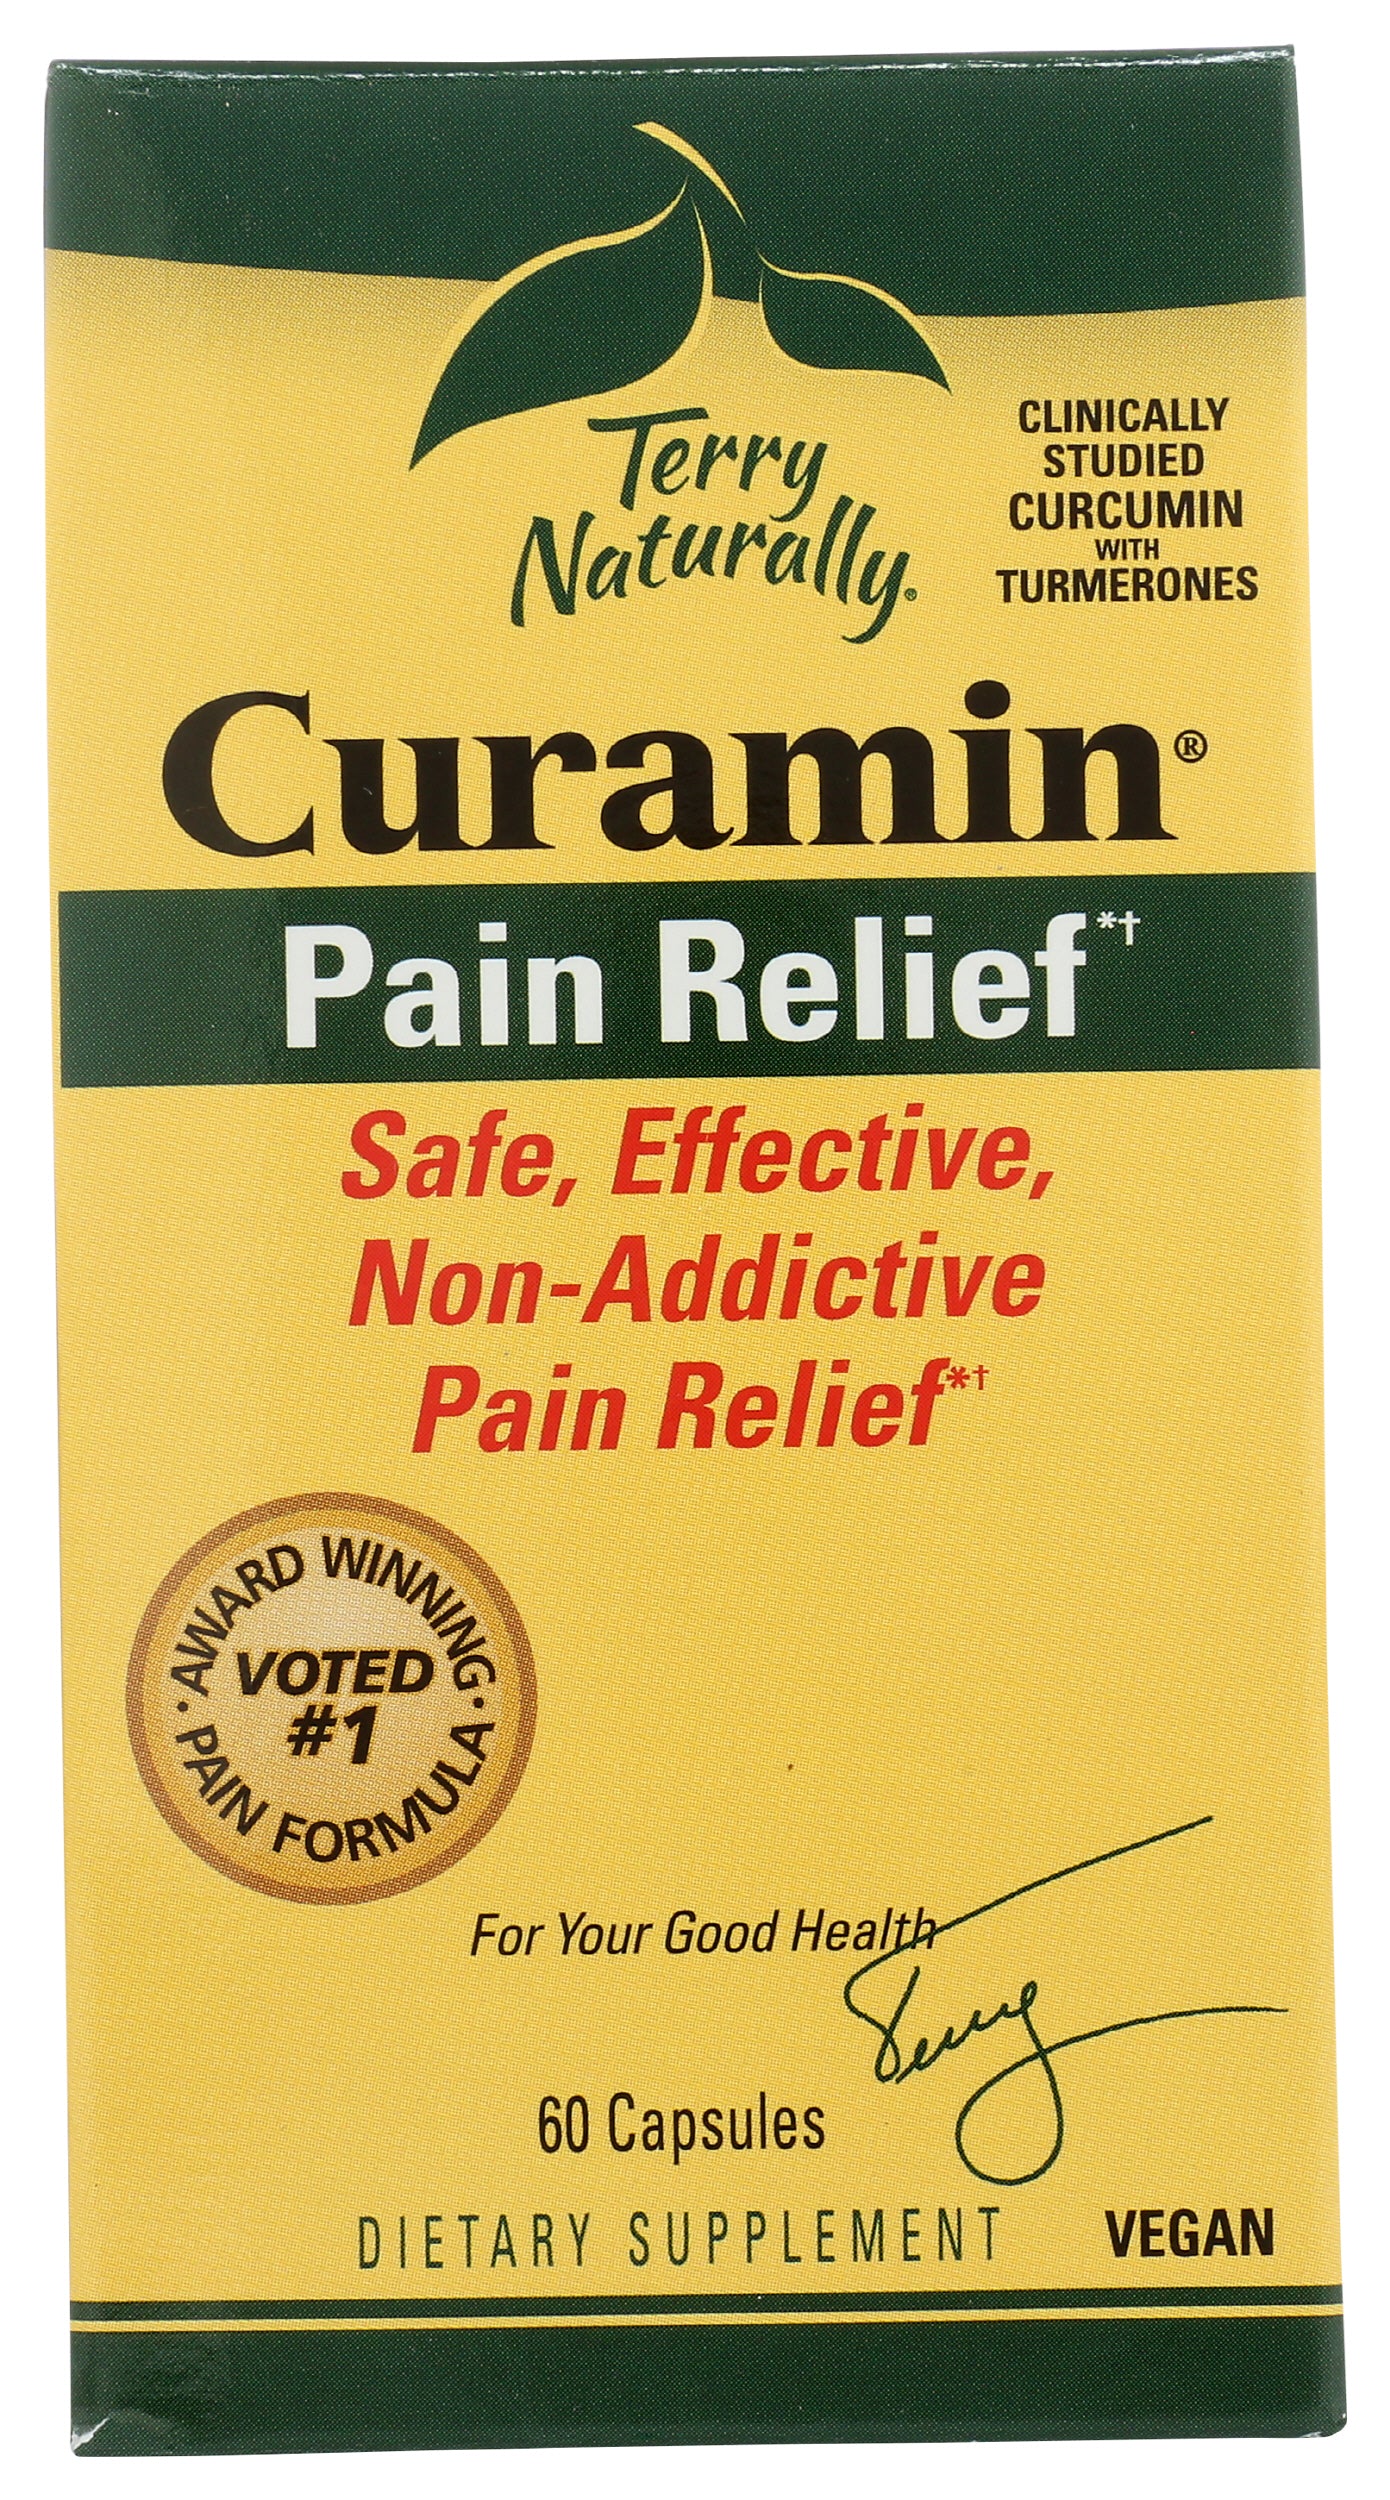 Terry Naturally Curamin Pain Relief 60 Capsules Front of Box